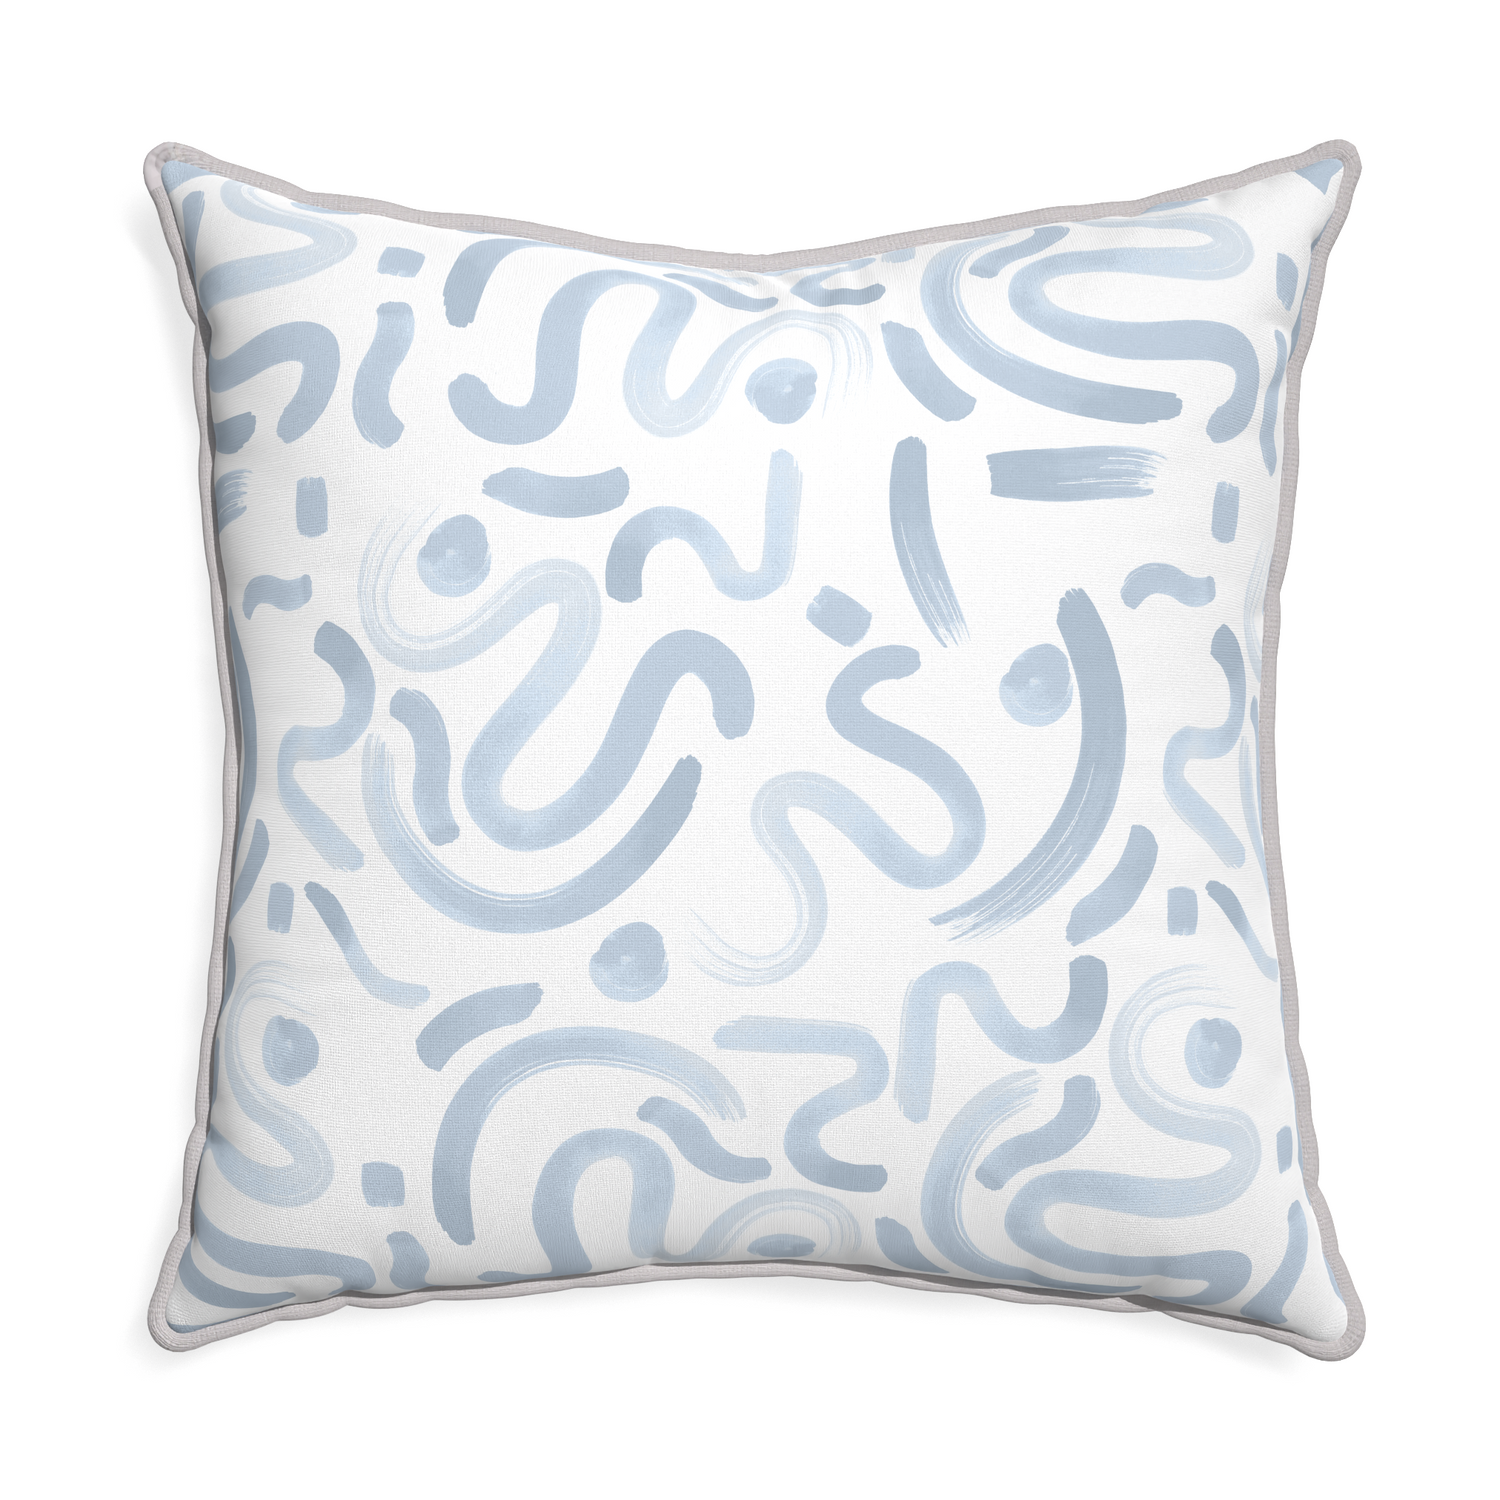 Euro-sham hockney sky custom abstract sky bluepillow with pebble piping on white background